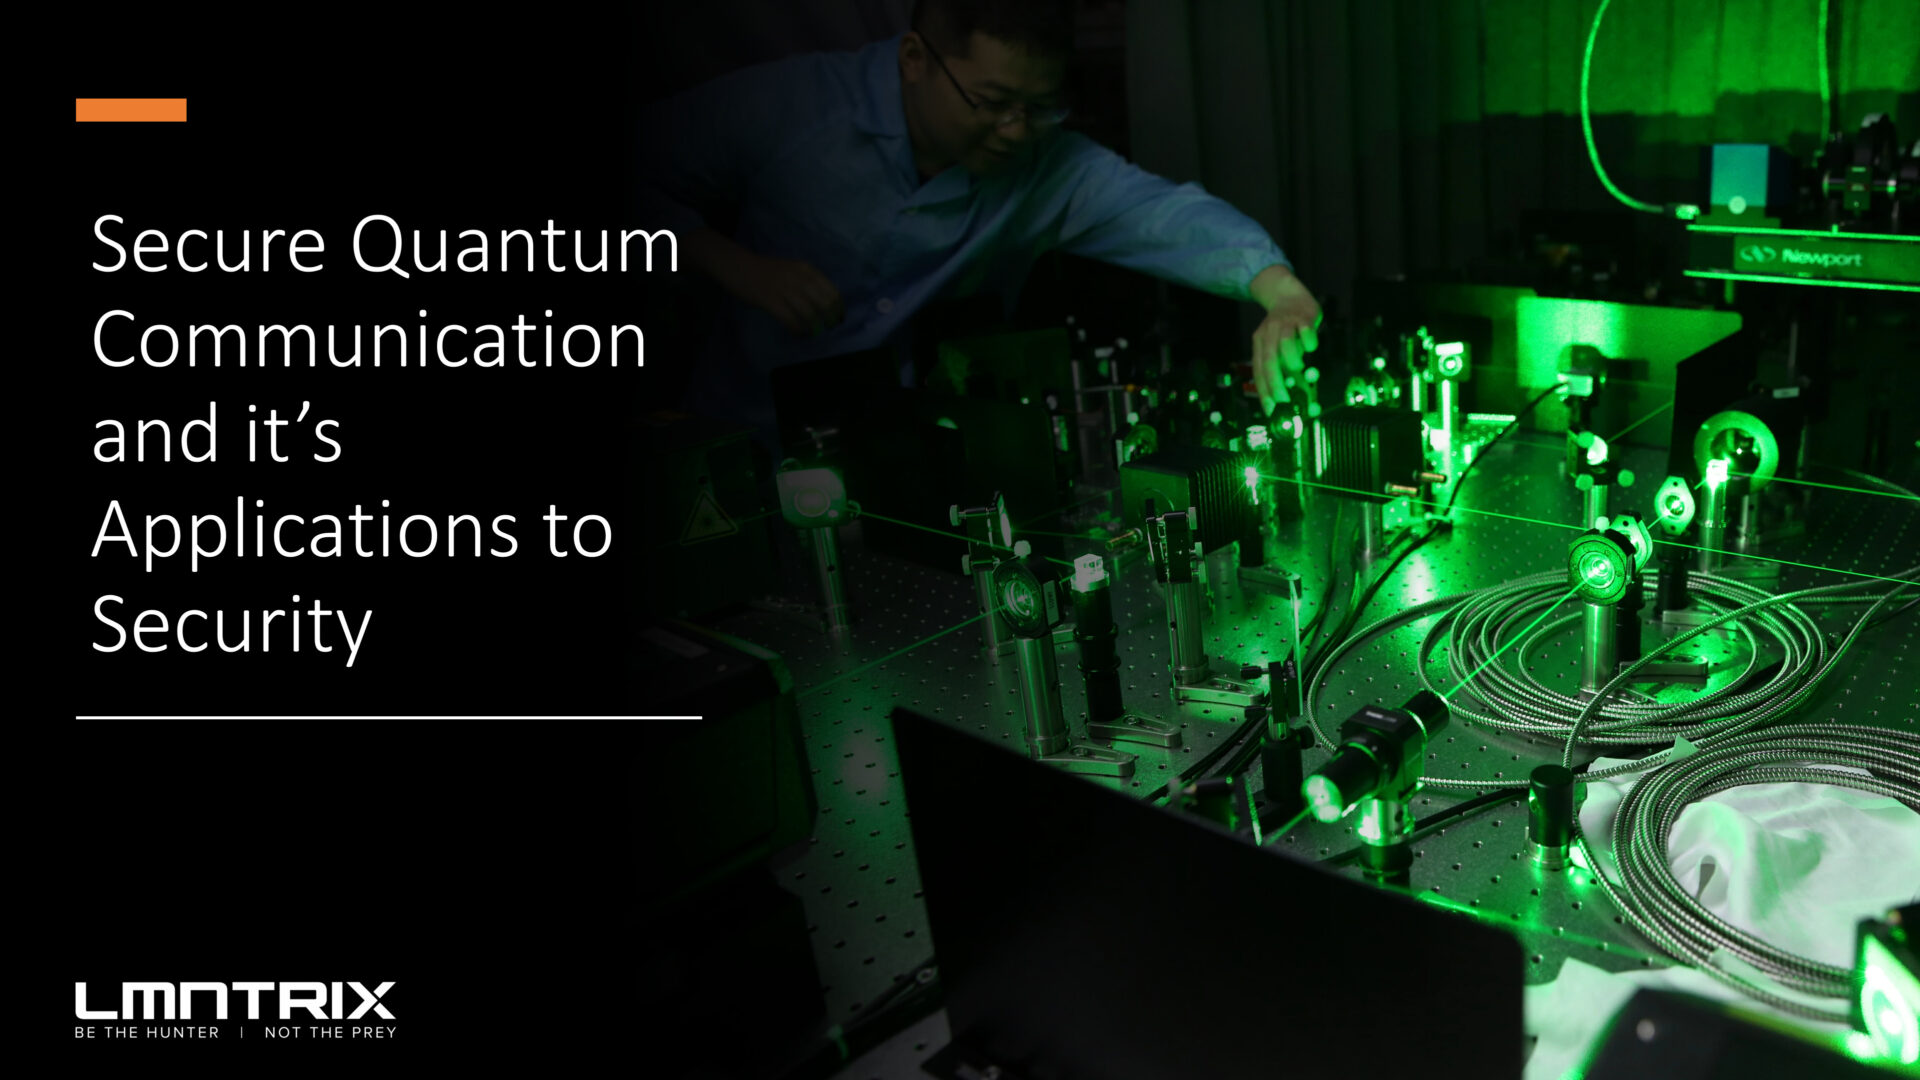 Secure Quantum Communication and Applications to Security